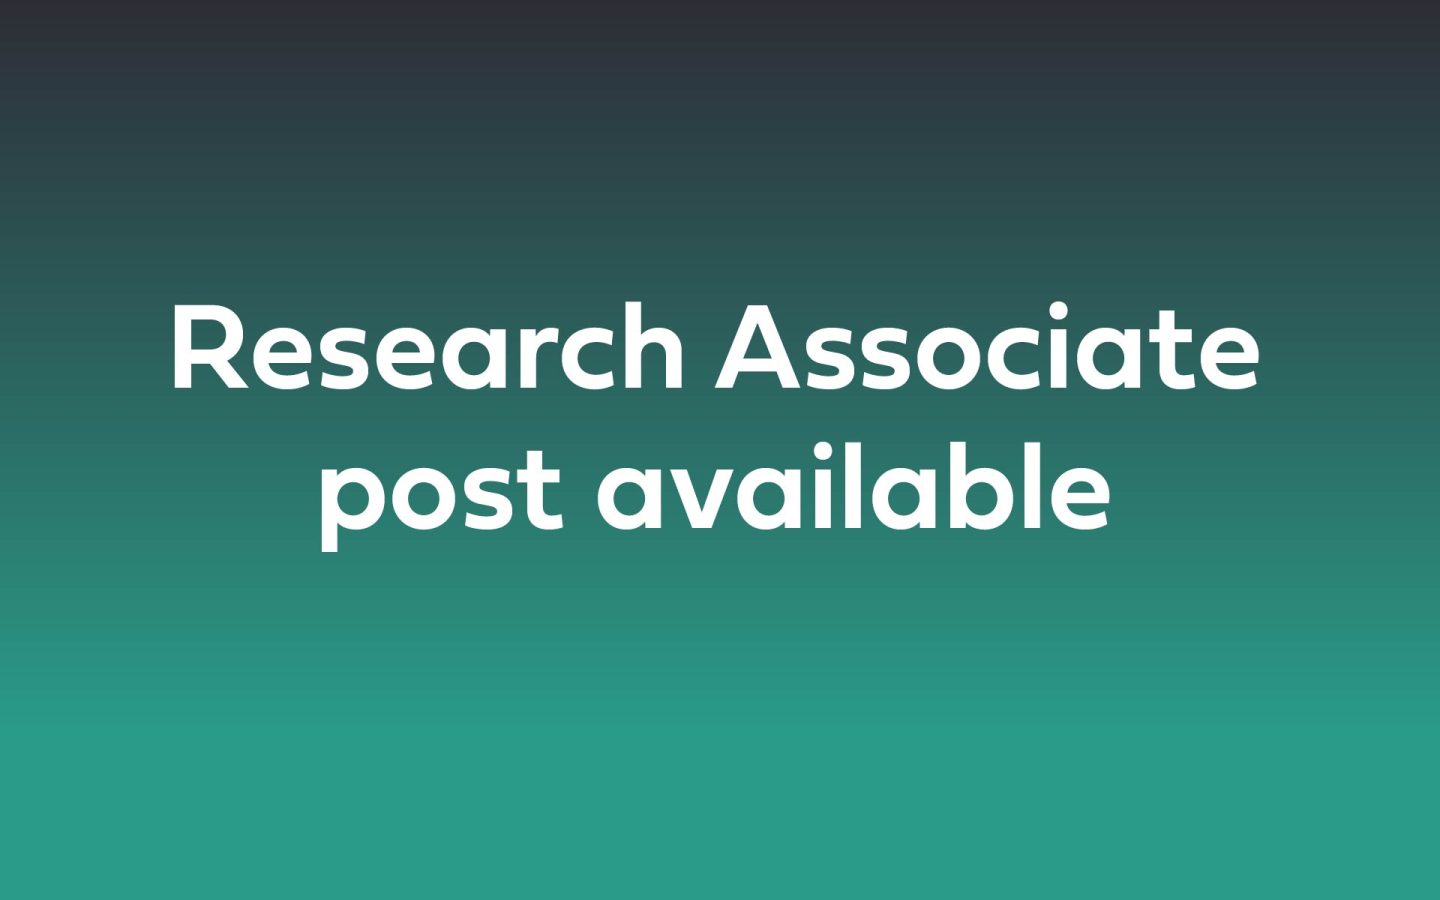 Text: "Research Associate post available"